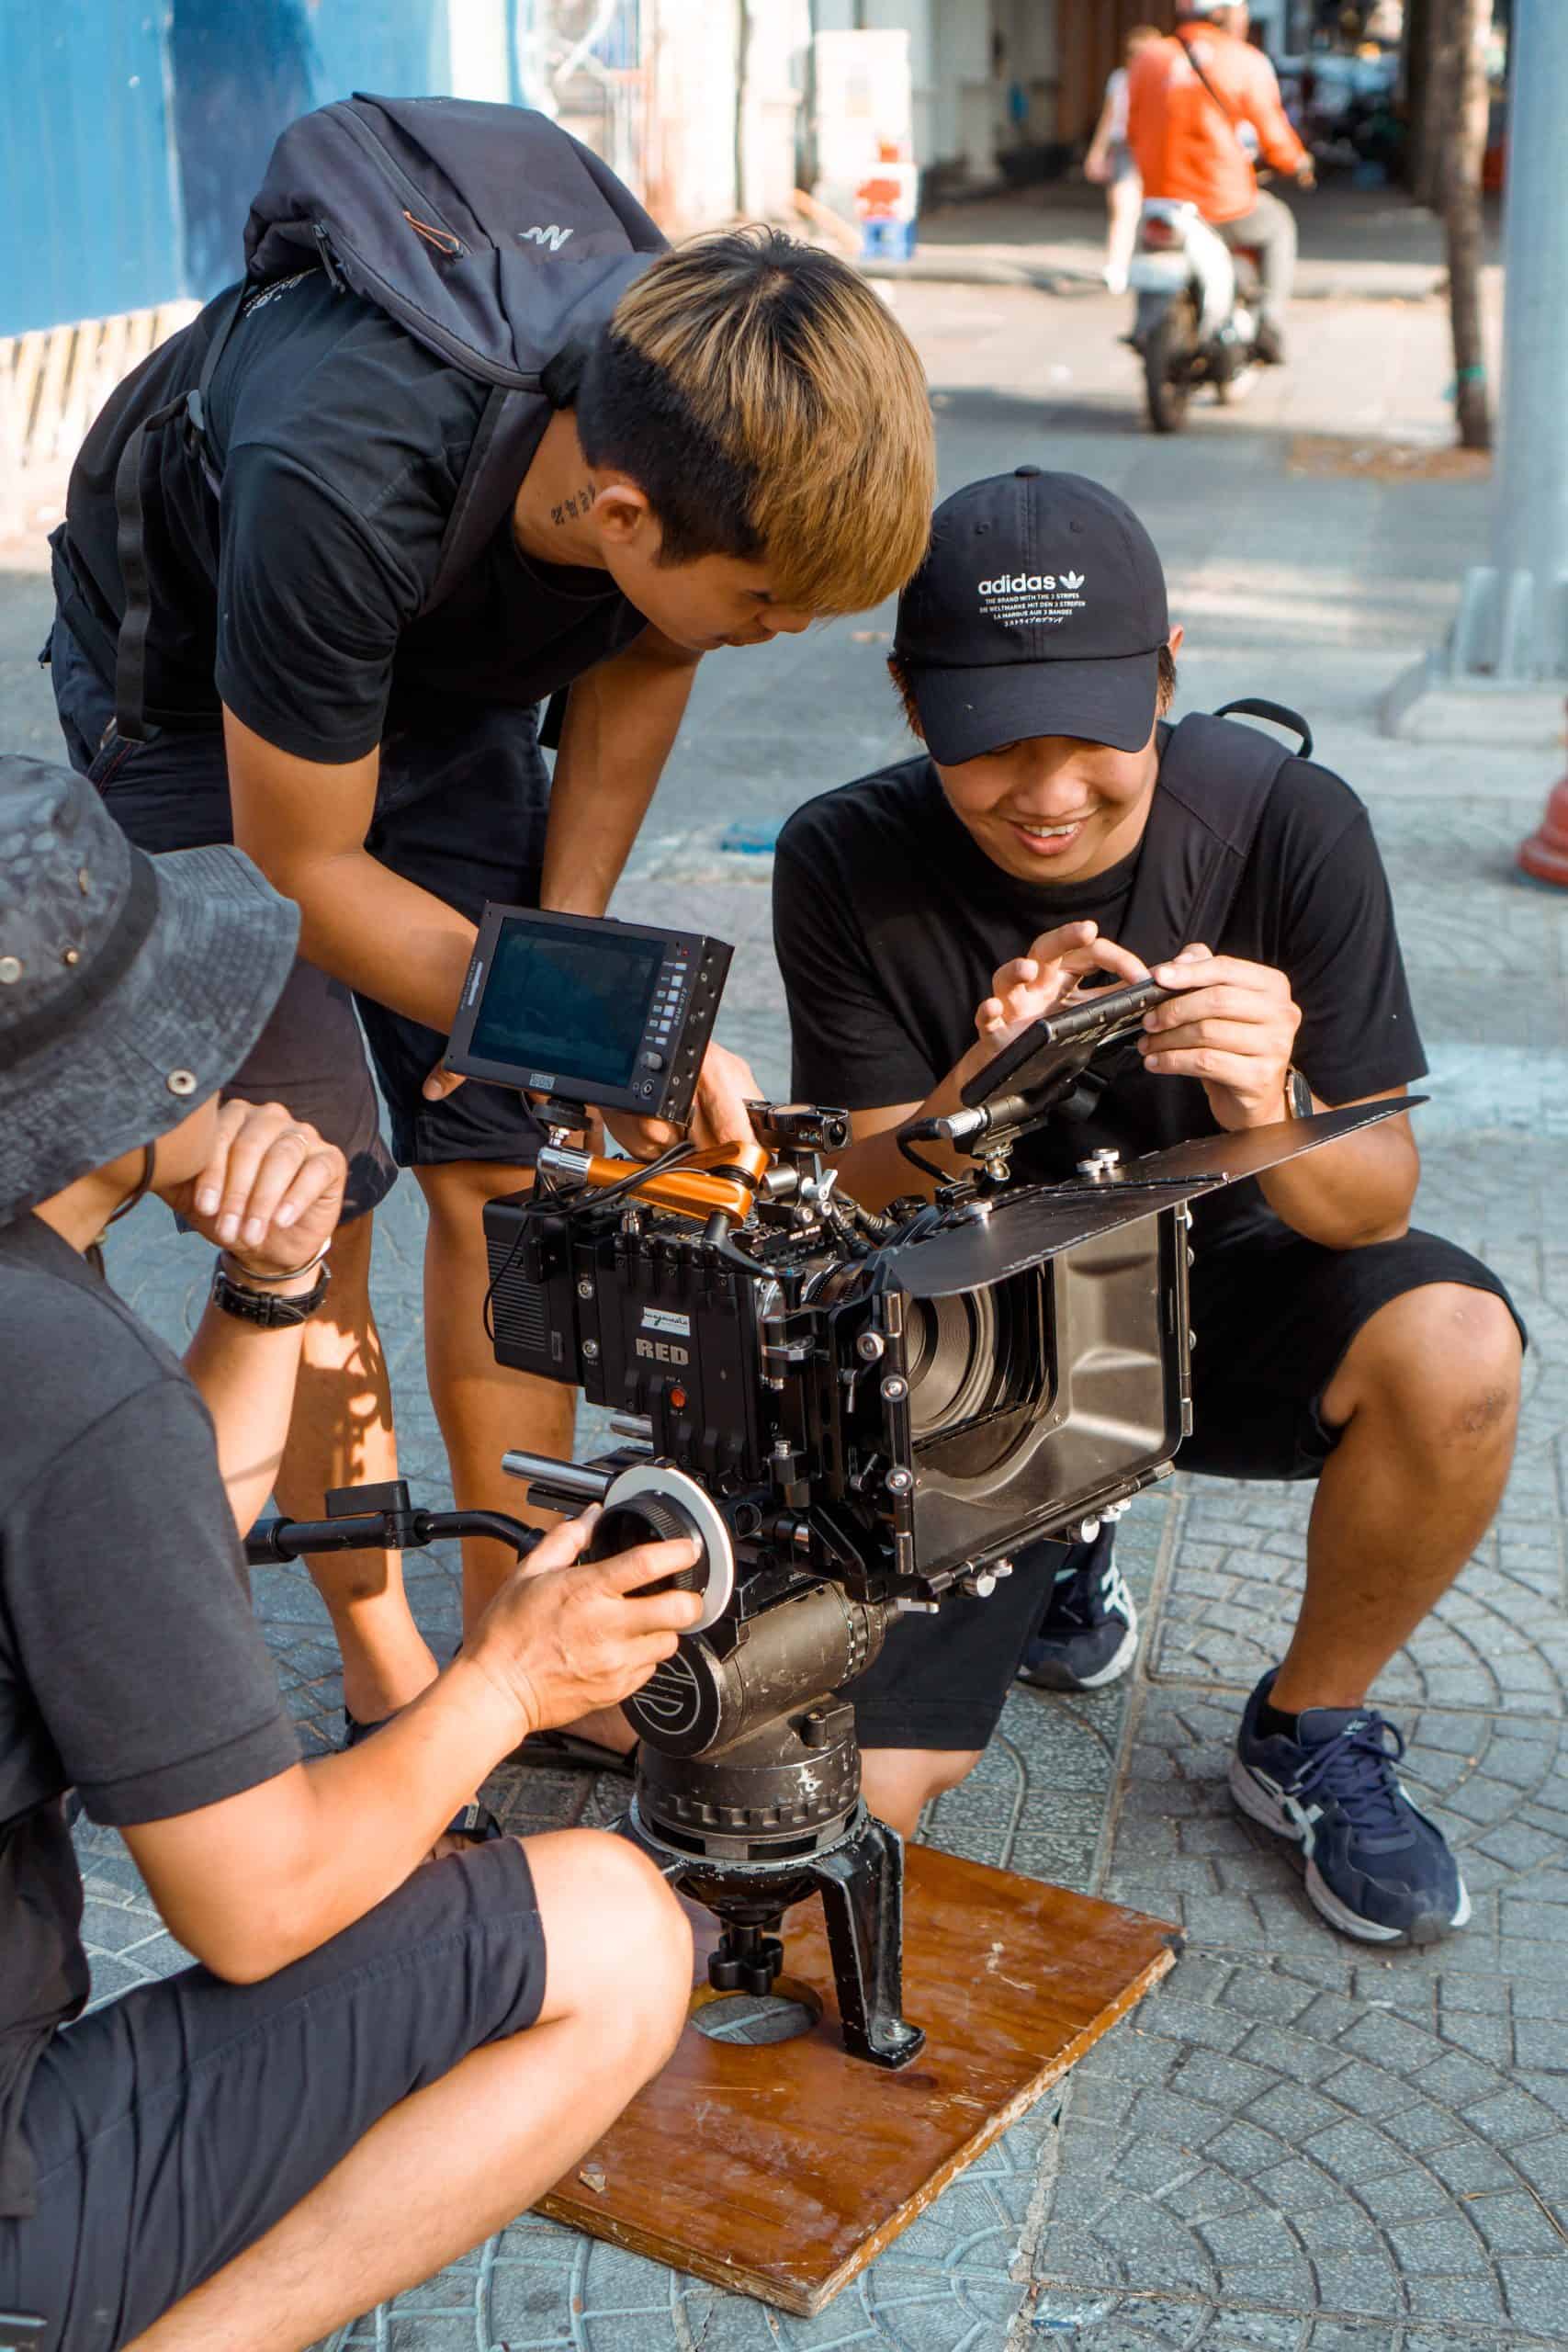 The skills required to be a film producer